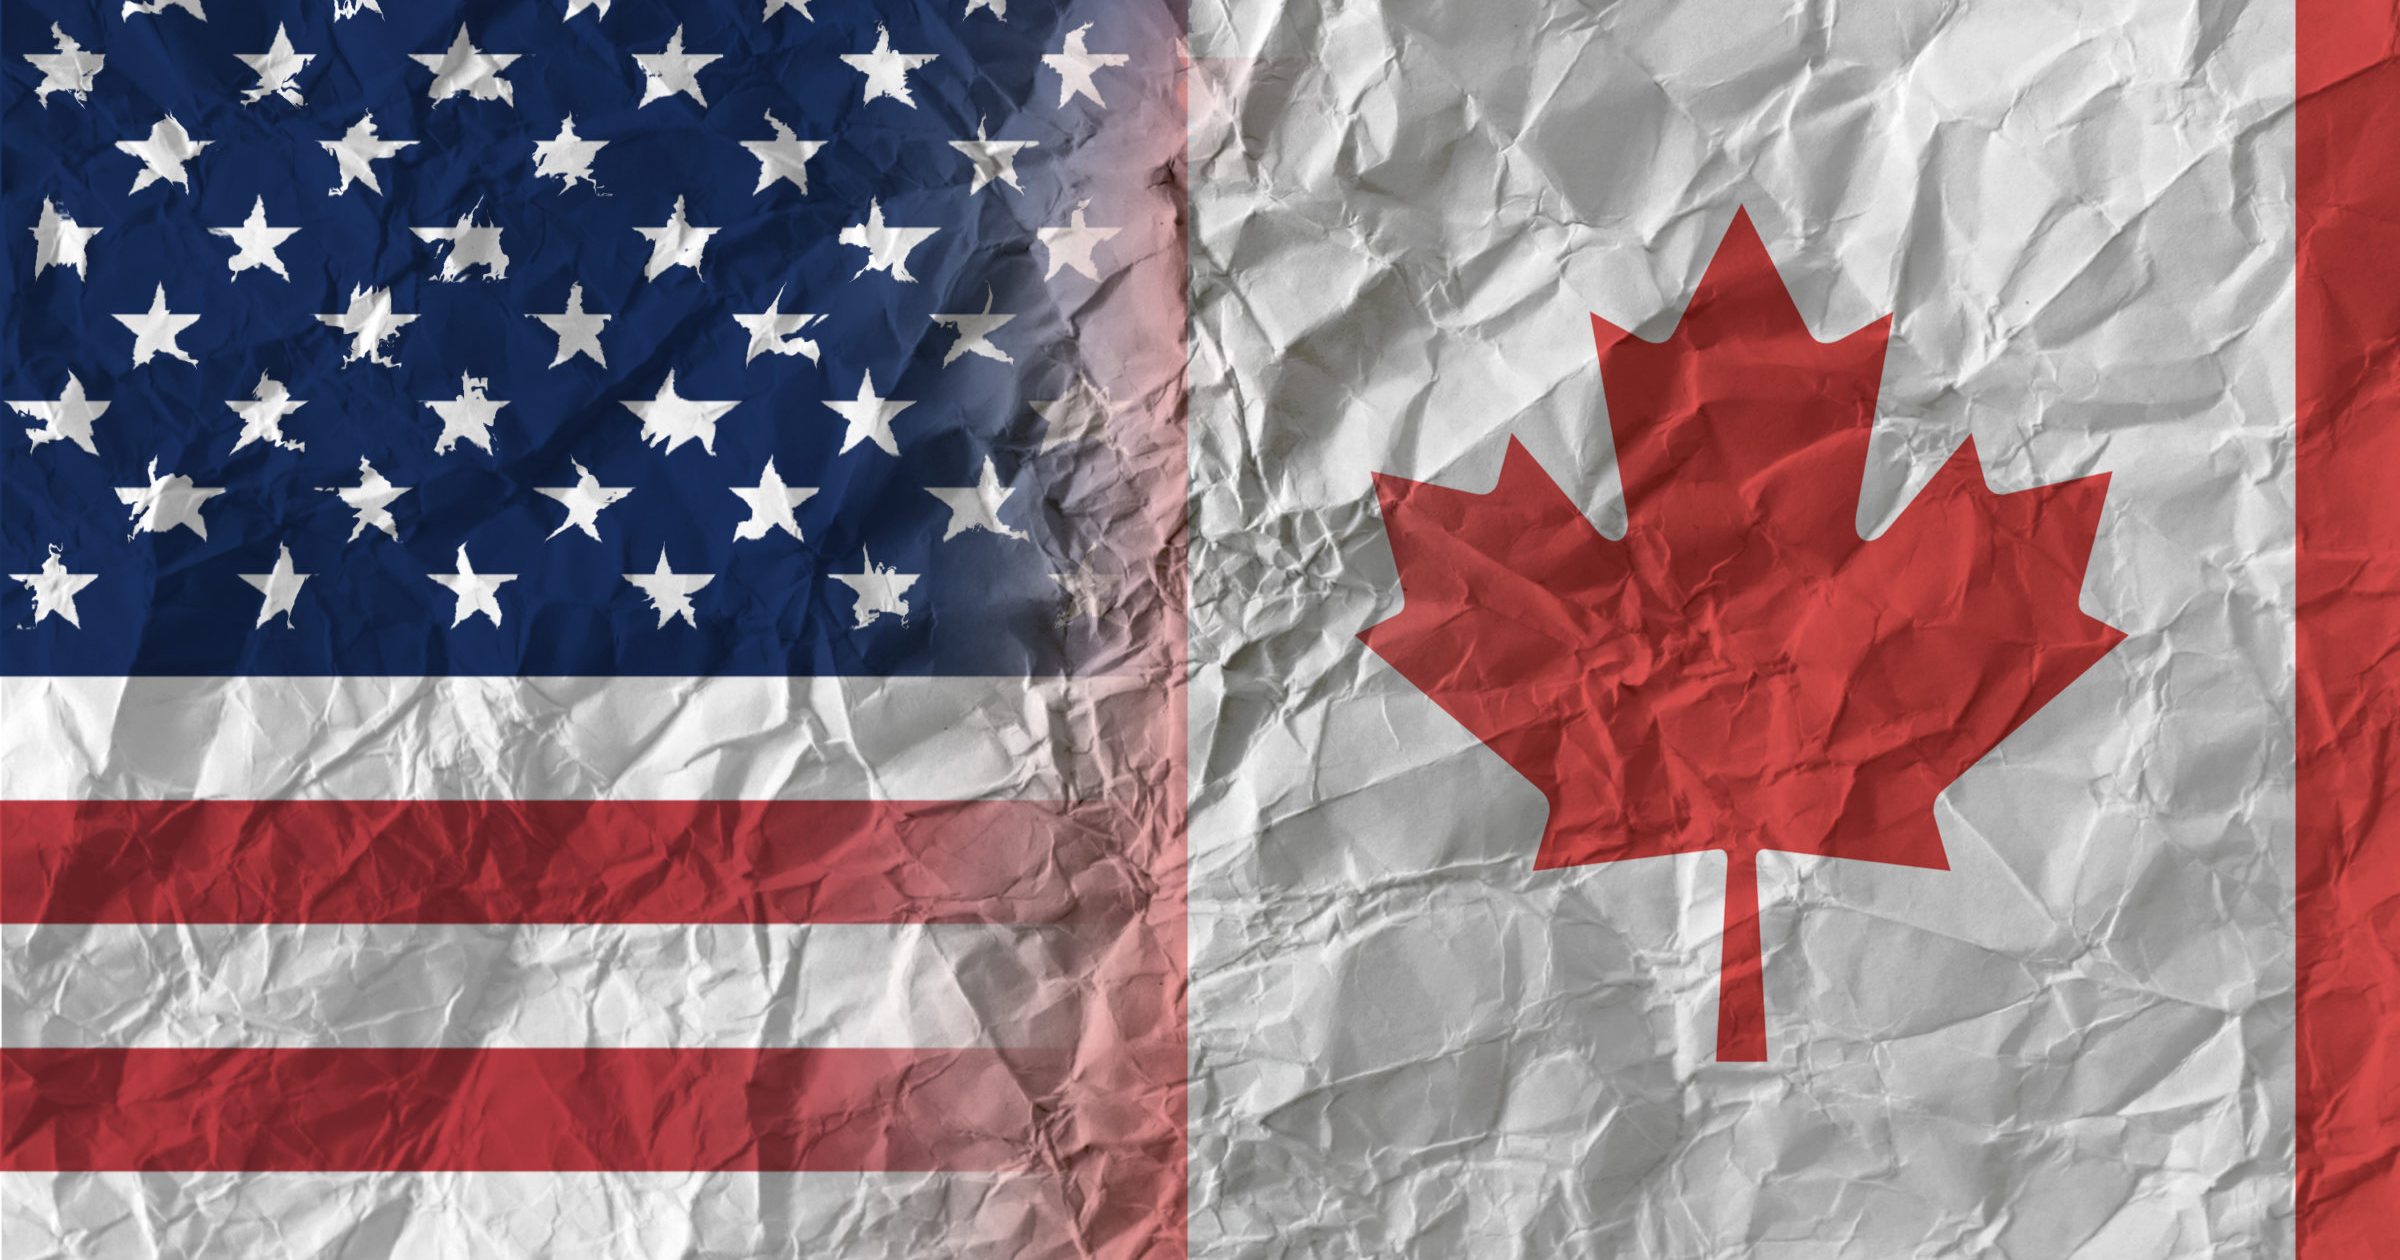 US and Canada on crumpled paper, policy and relations concept